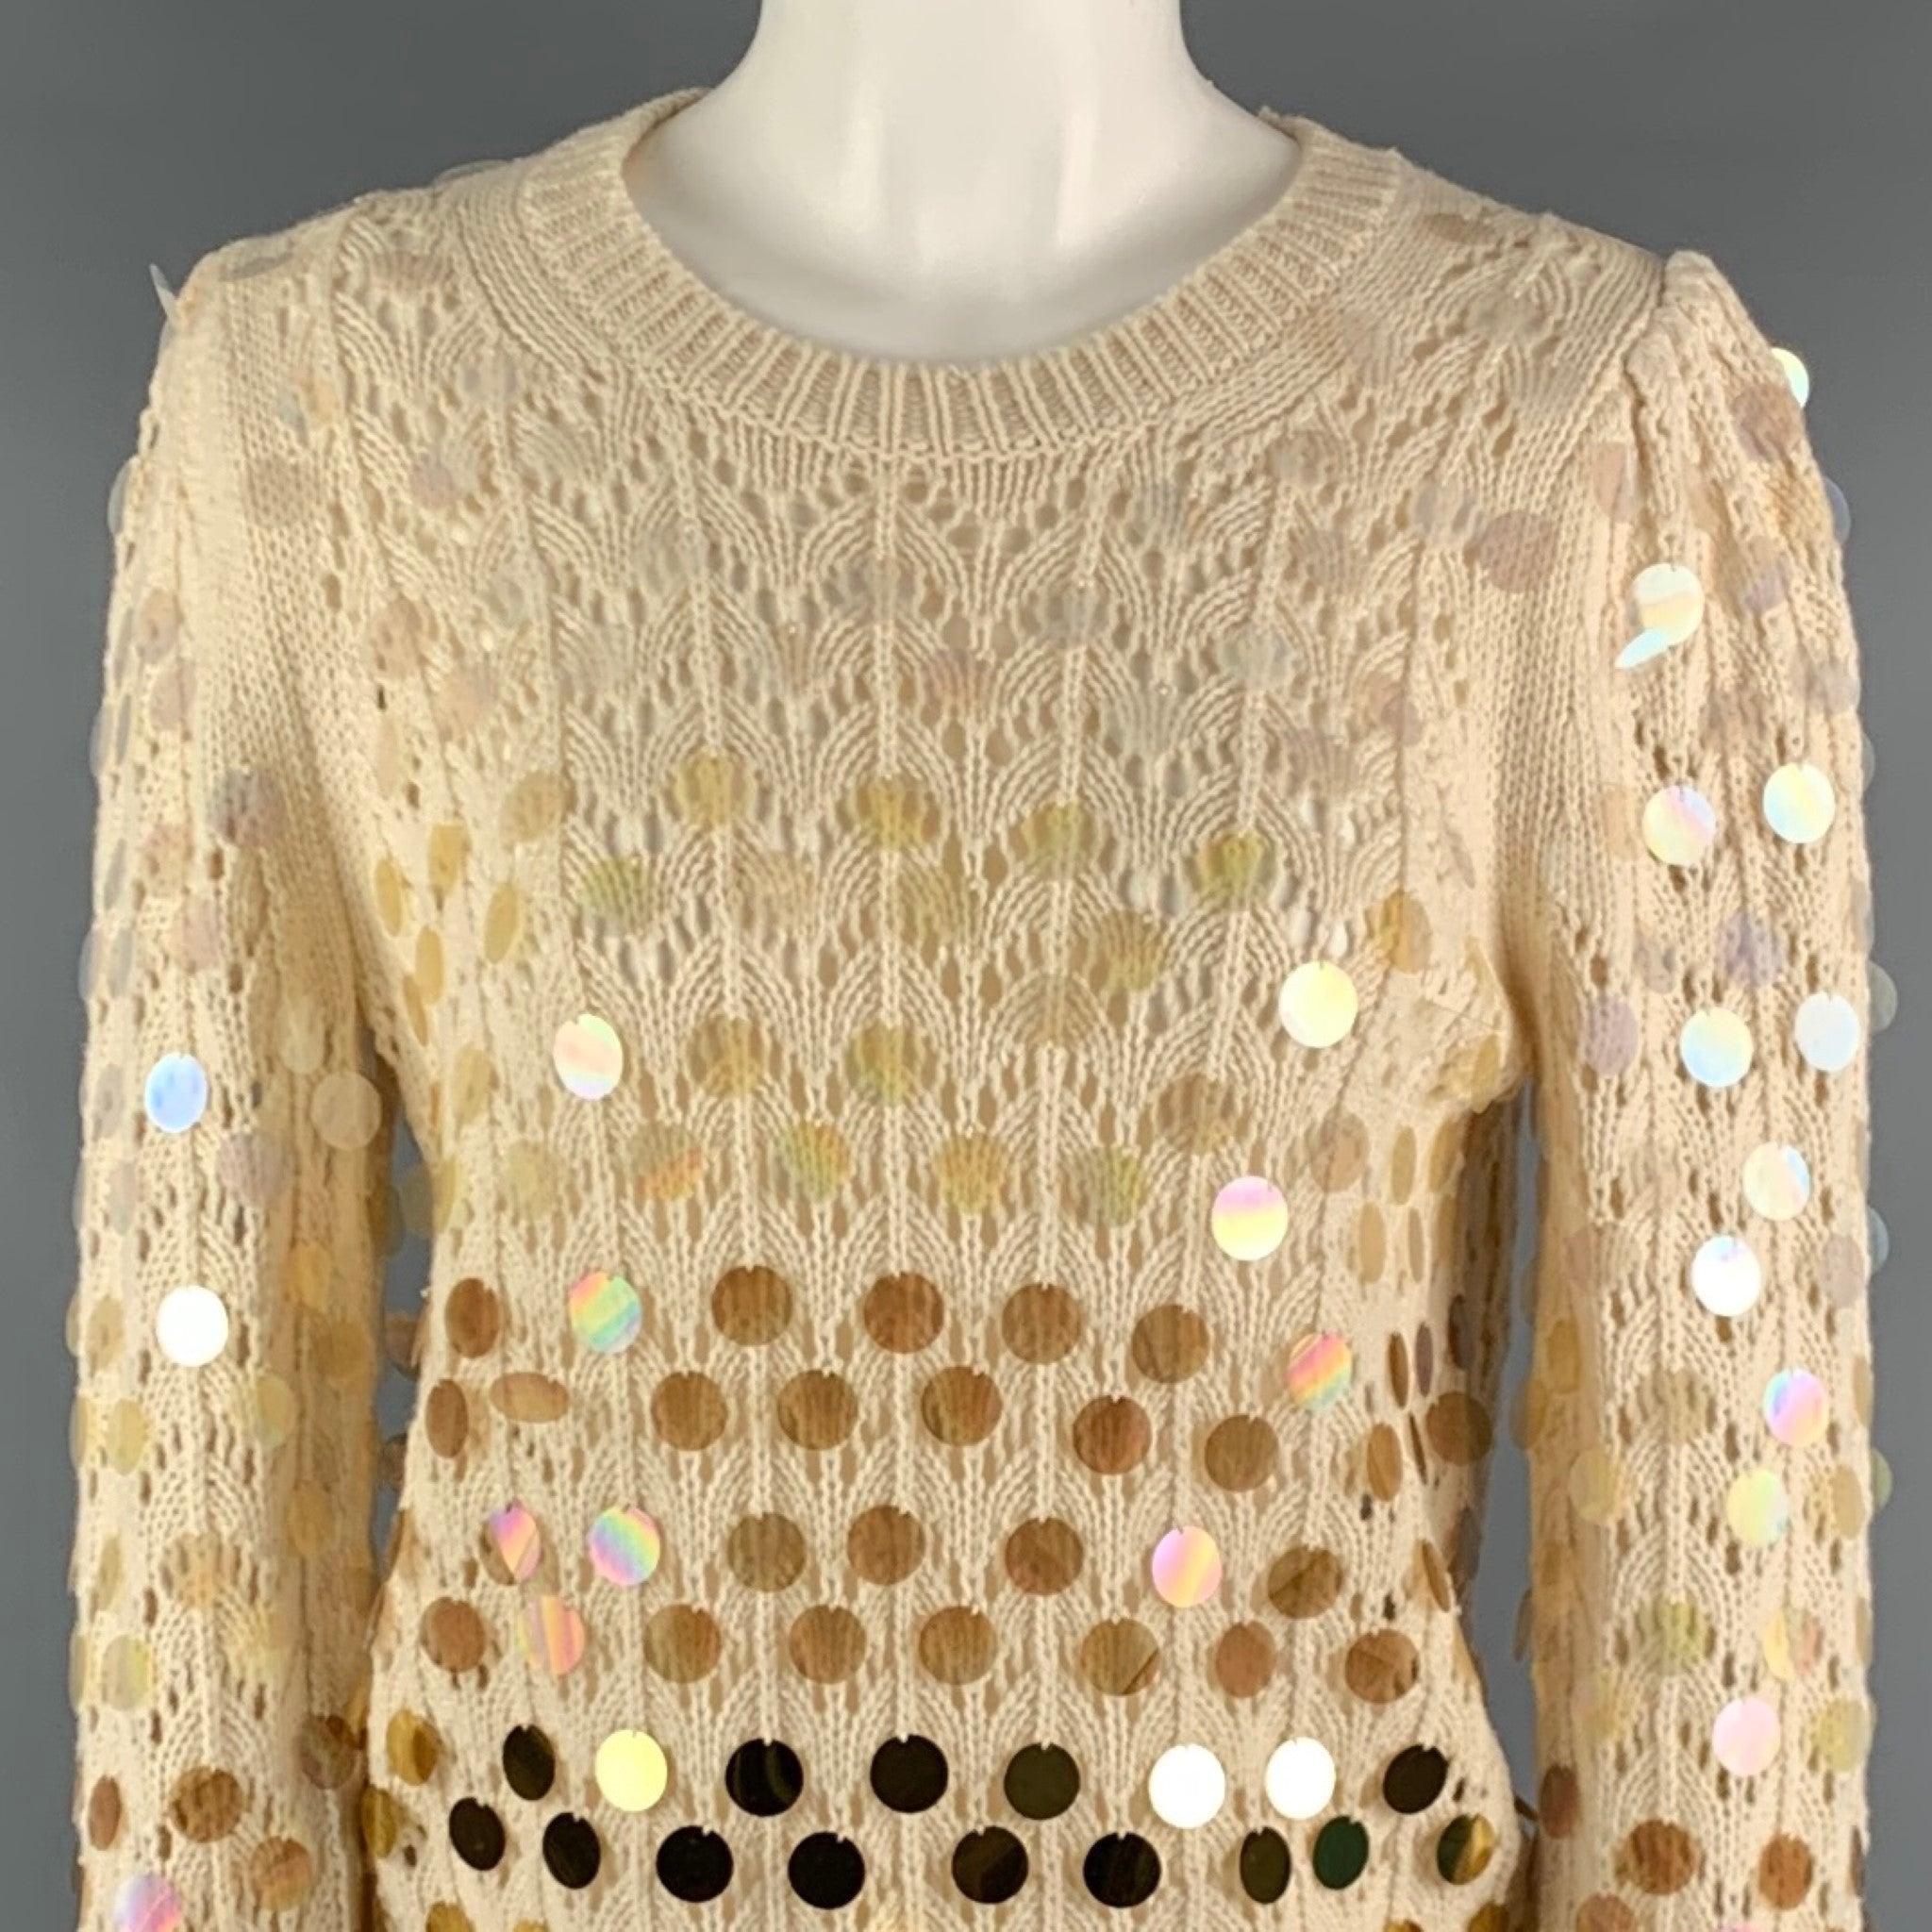 MARC JACOBS sweater
in a cream wool cashmere blend knit featuring payette sequins which ombre from clear to an opaque gold, lace-like see-through knit technique, raised shoulders, and a crew neck.Very Good Pre-Owned Condition. Minor signs of wear on